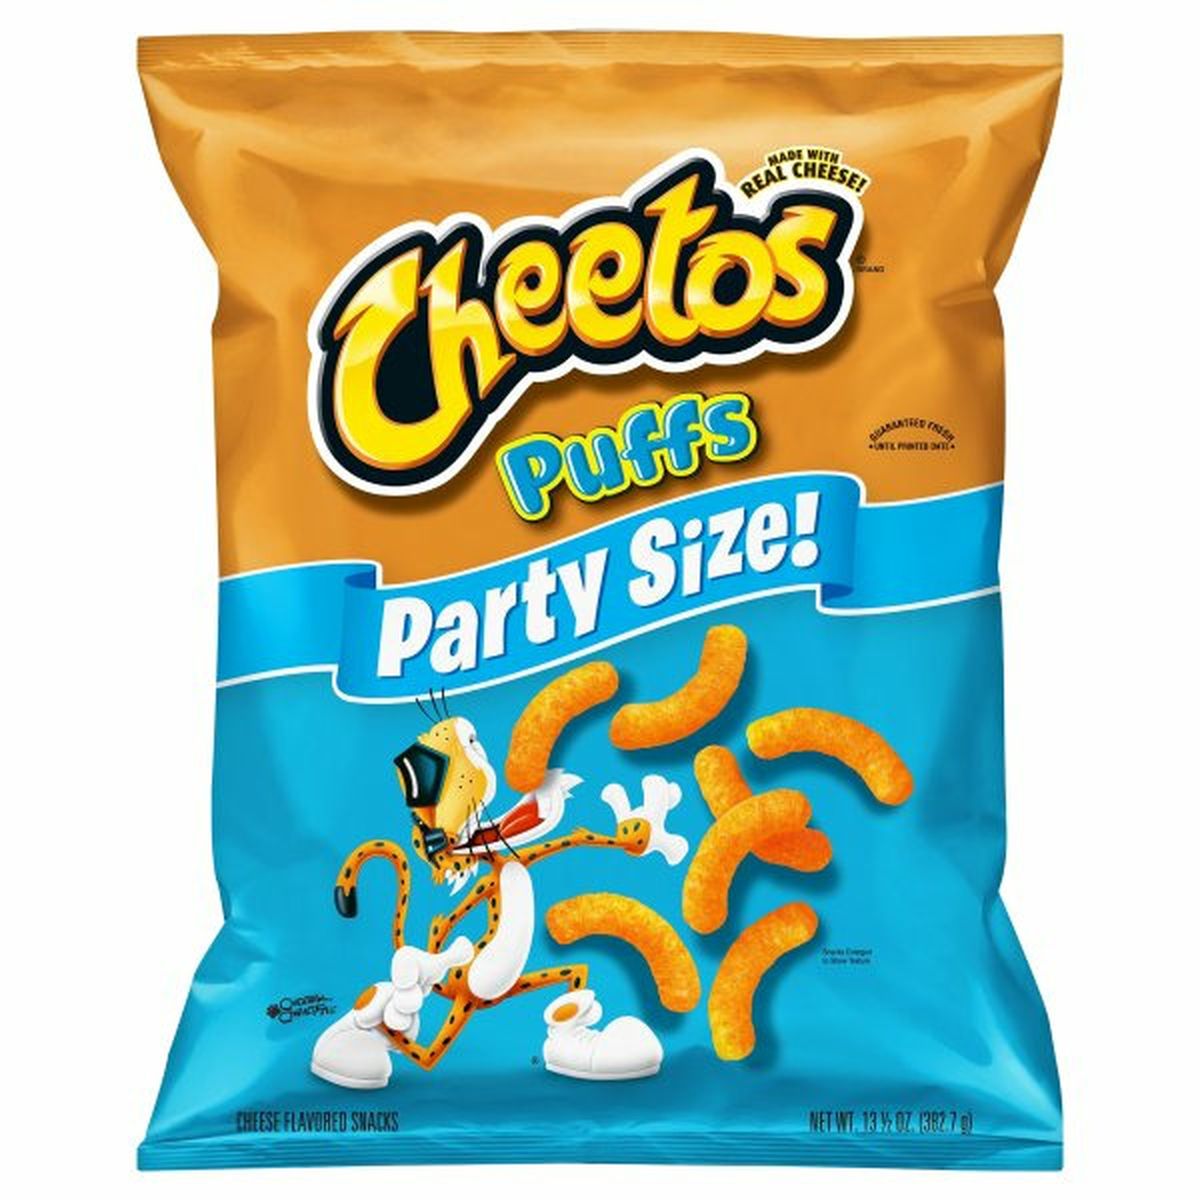 Calories in CHEETOS Puffs Cheese Flavored Snacks,